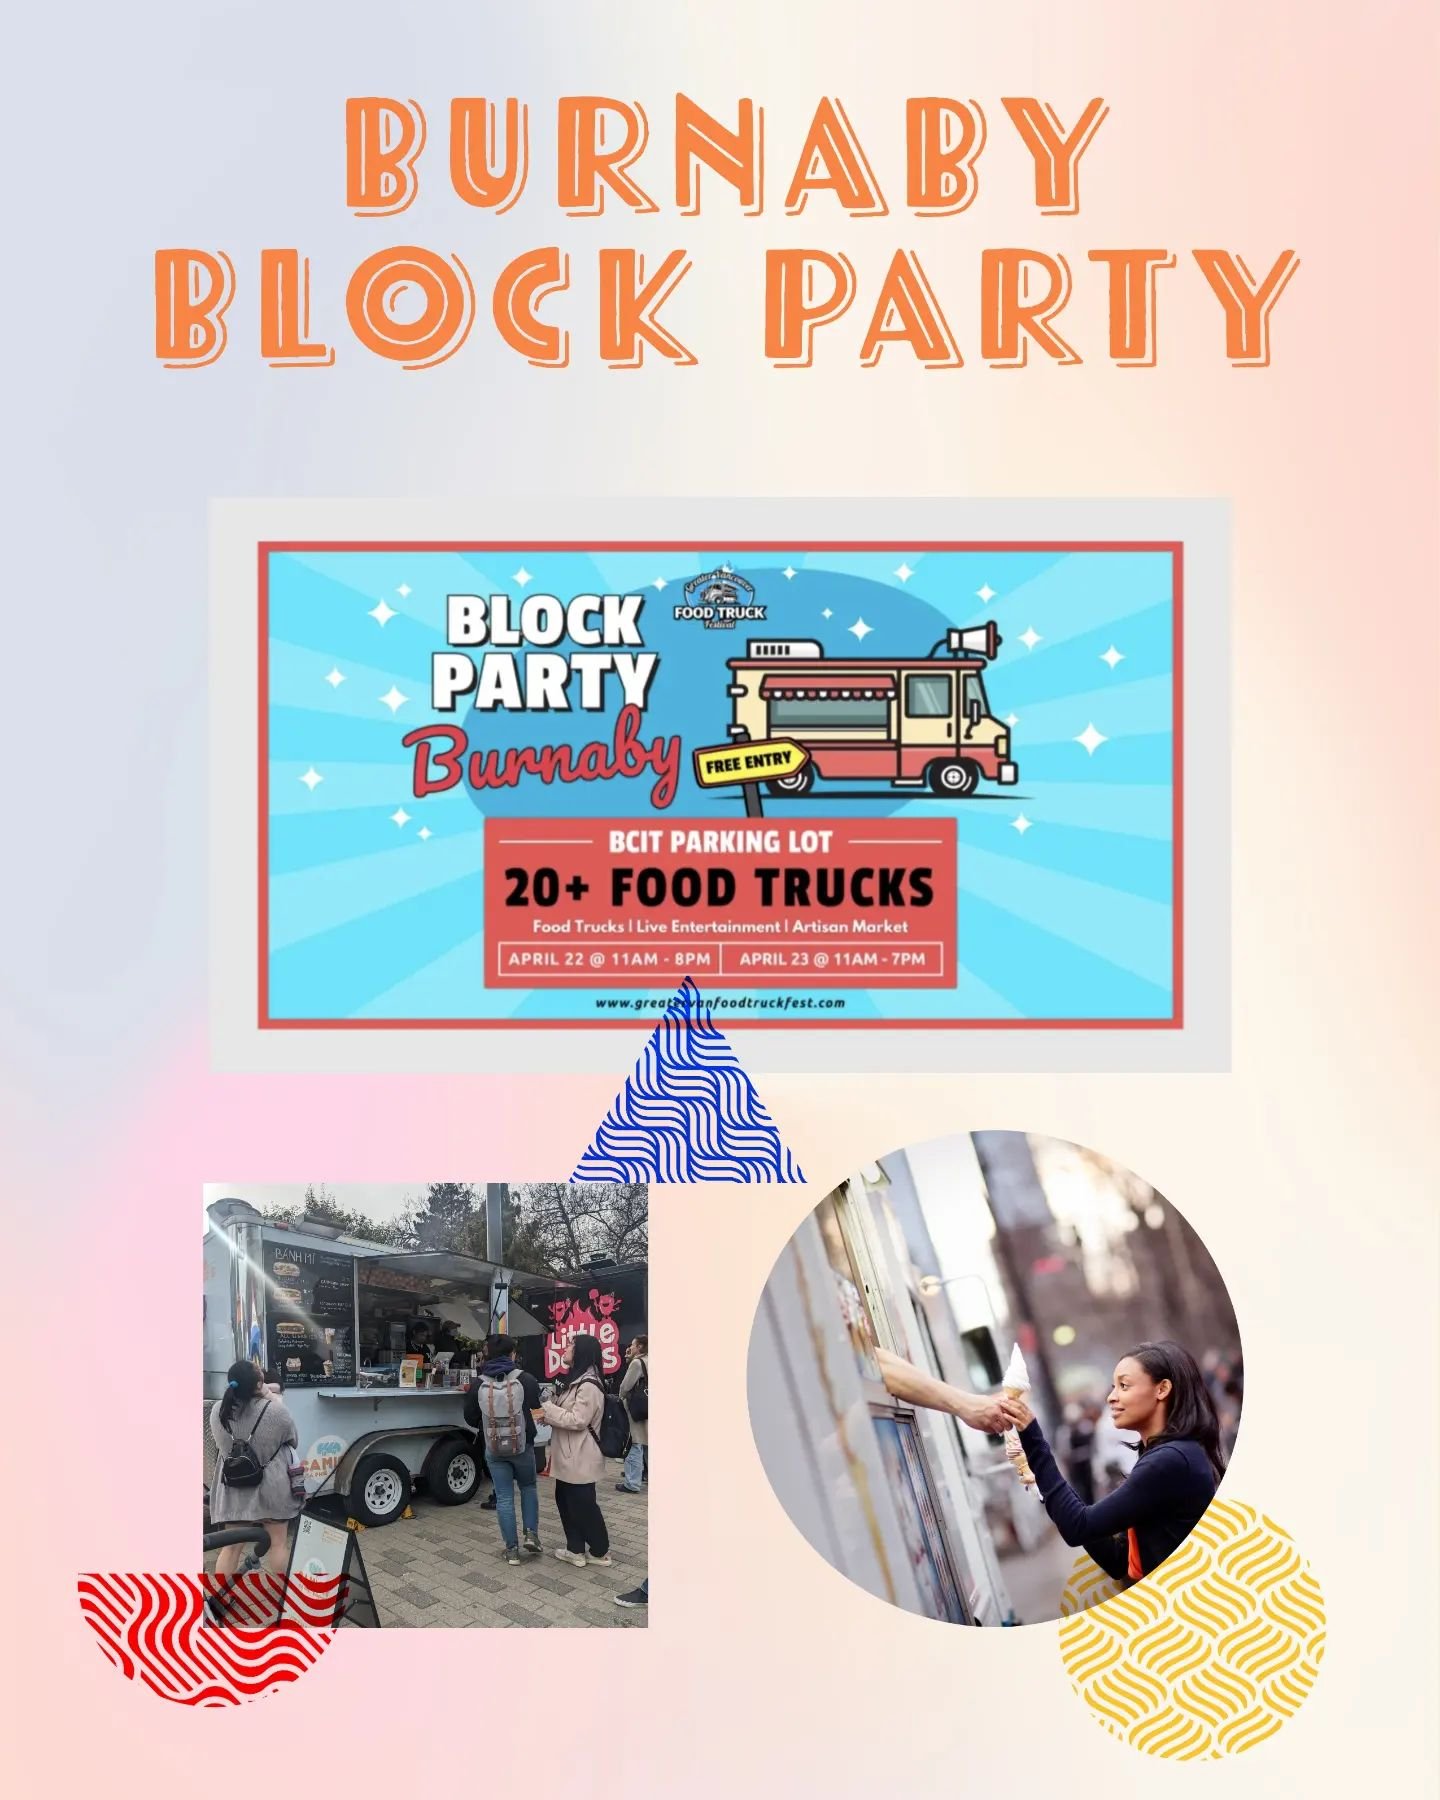 🚨 Burnaby Block Party Alert 🚨

Get ready for a fun-filled day of food, music, and shopping! Join us on Apr 22 and 23 at BCIT Burnaby Parking Lot for a Block Party like no other.

An amazing lineup of food trucks serving up delicious eats all day lo